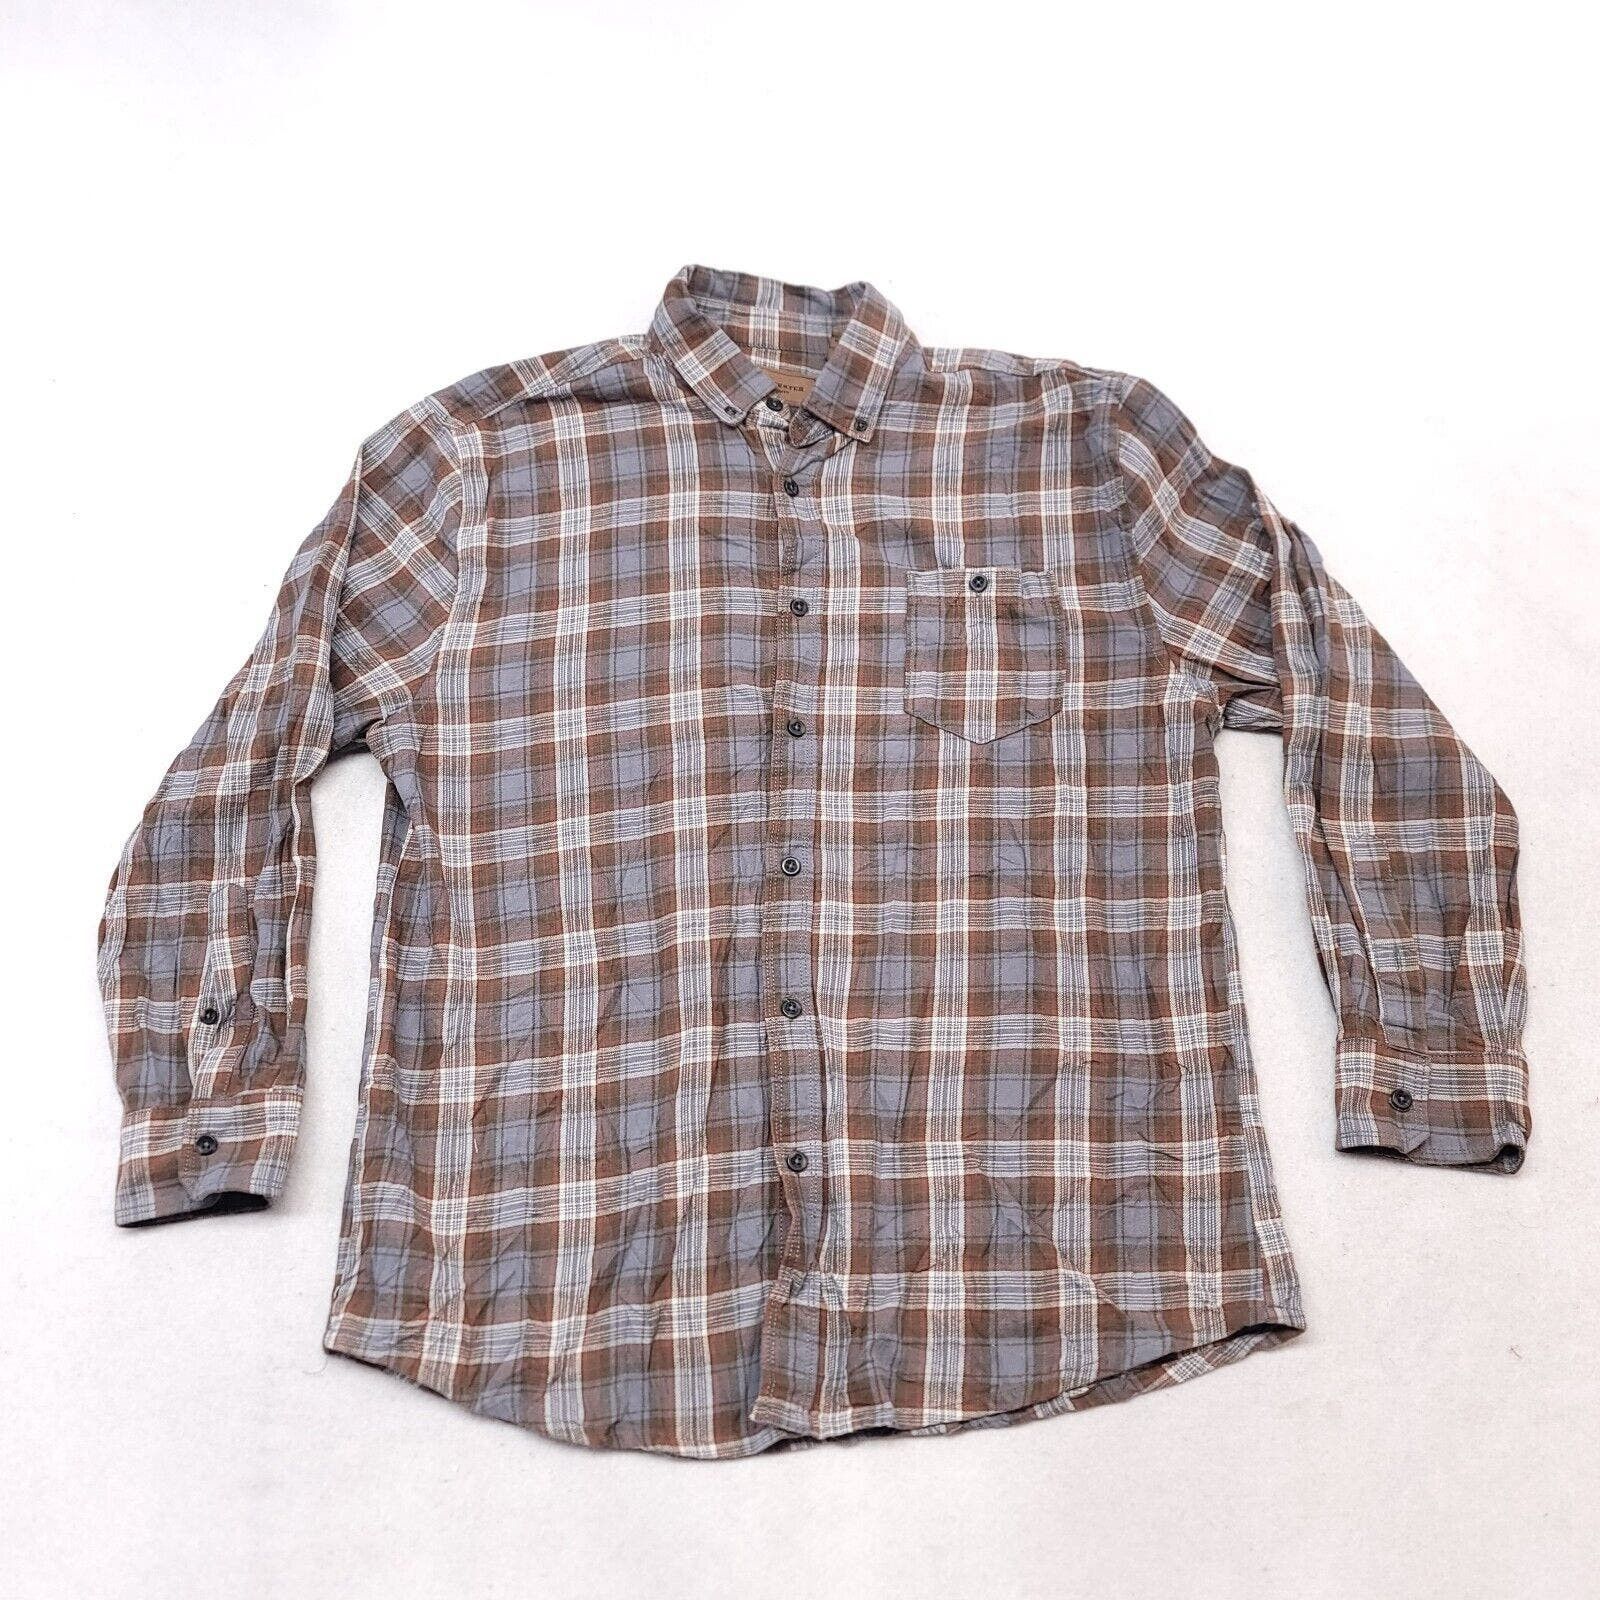 Clearwater Outfitters Clearwater Outfitters Tartan Flannel Shirt Mens Size L Brown Size US L / EU 52-54 / 3 - 2 Preview